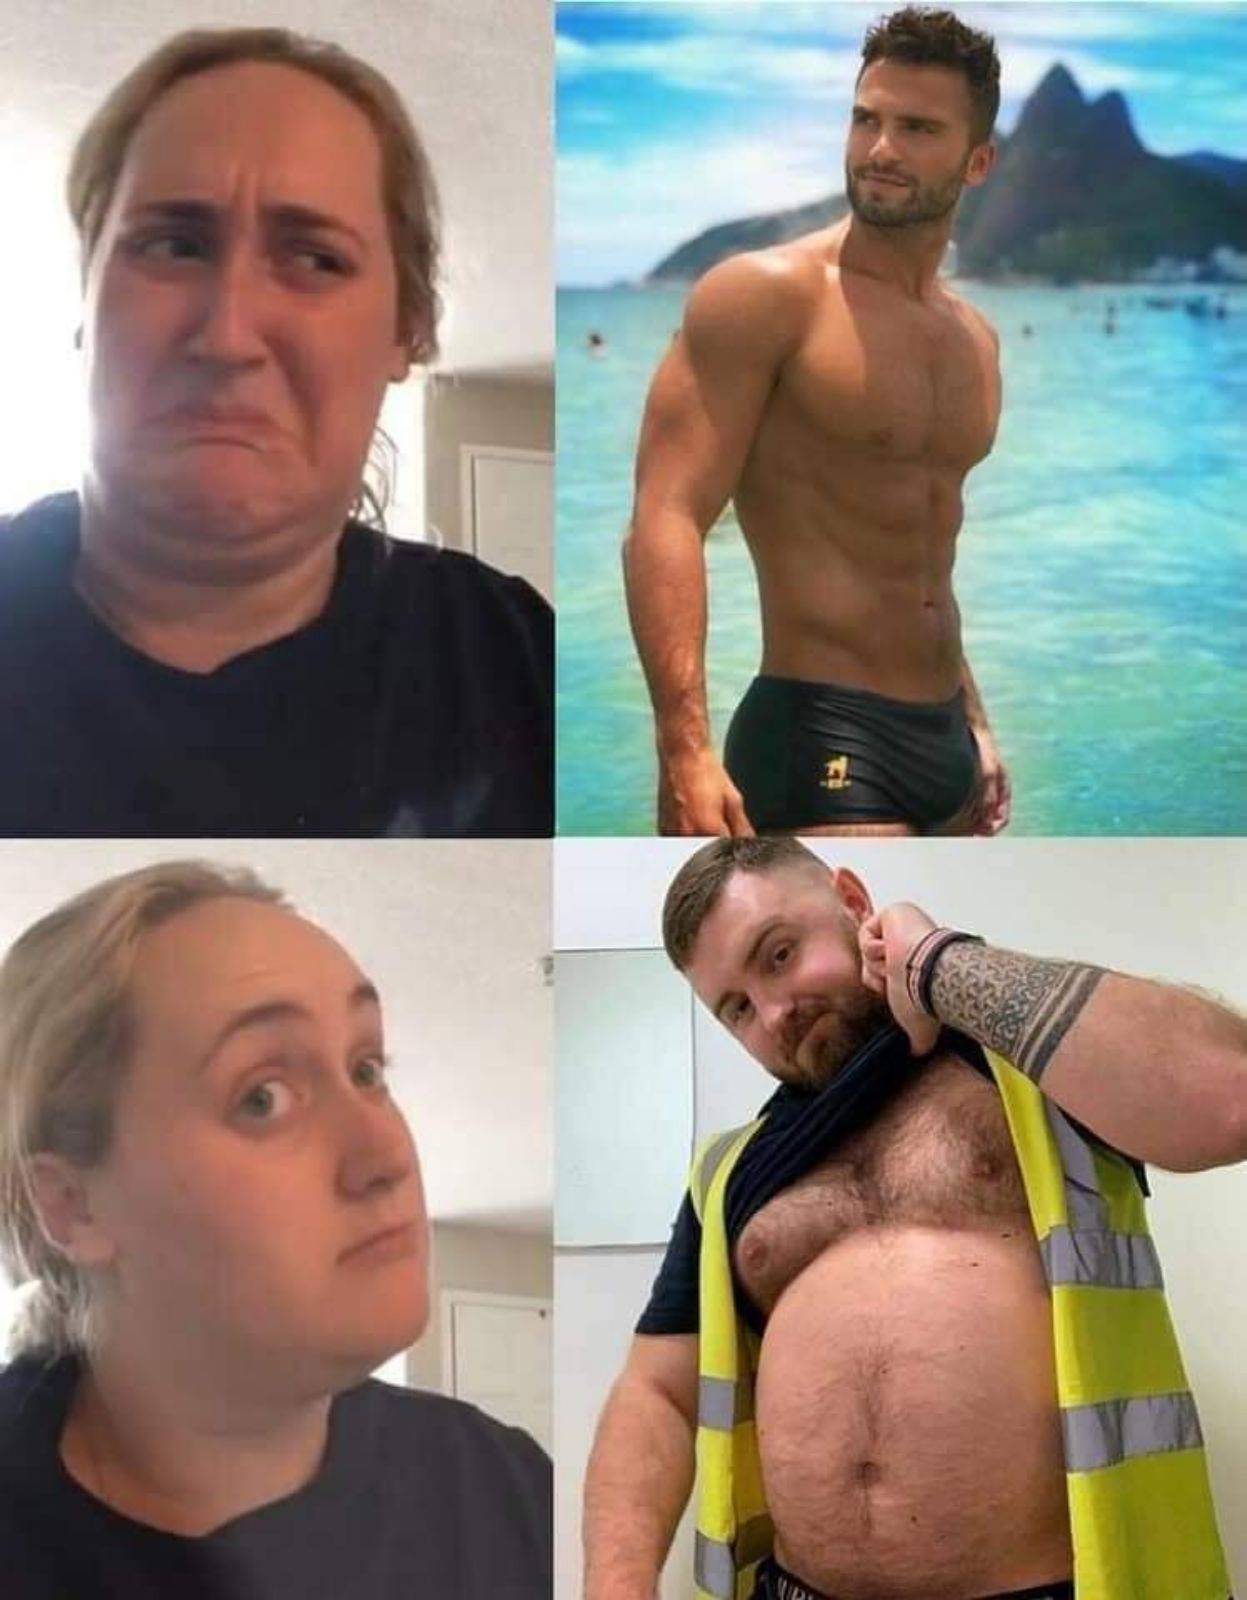 a set of four images. first image features a woman looking in disgust. image next to that one is a handsome thin man with traditional good looks. third image is the same woman looking curious and approving. the fourth image is a guy with some meat on his bones and hairy, embodying a dad bod